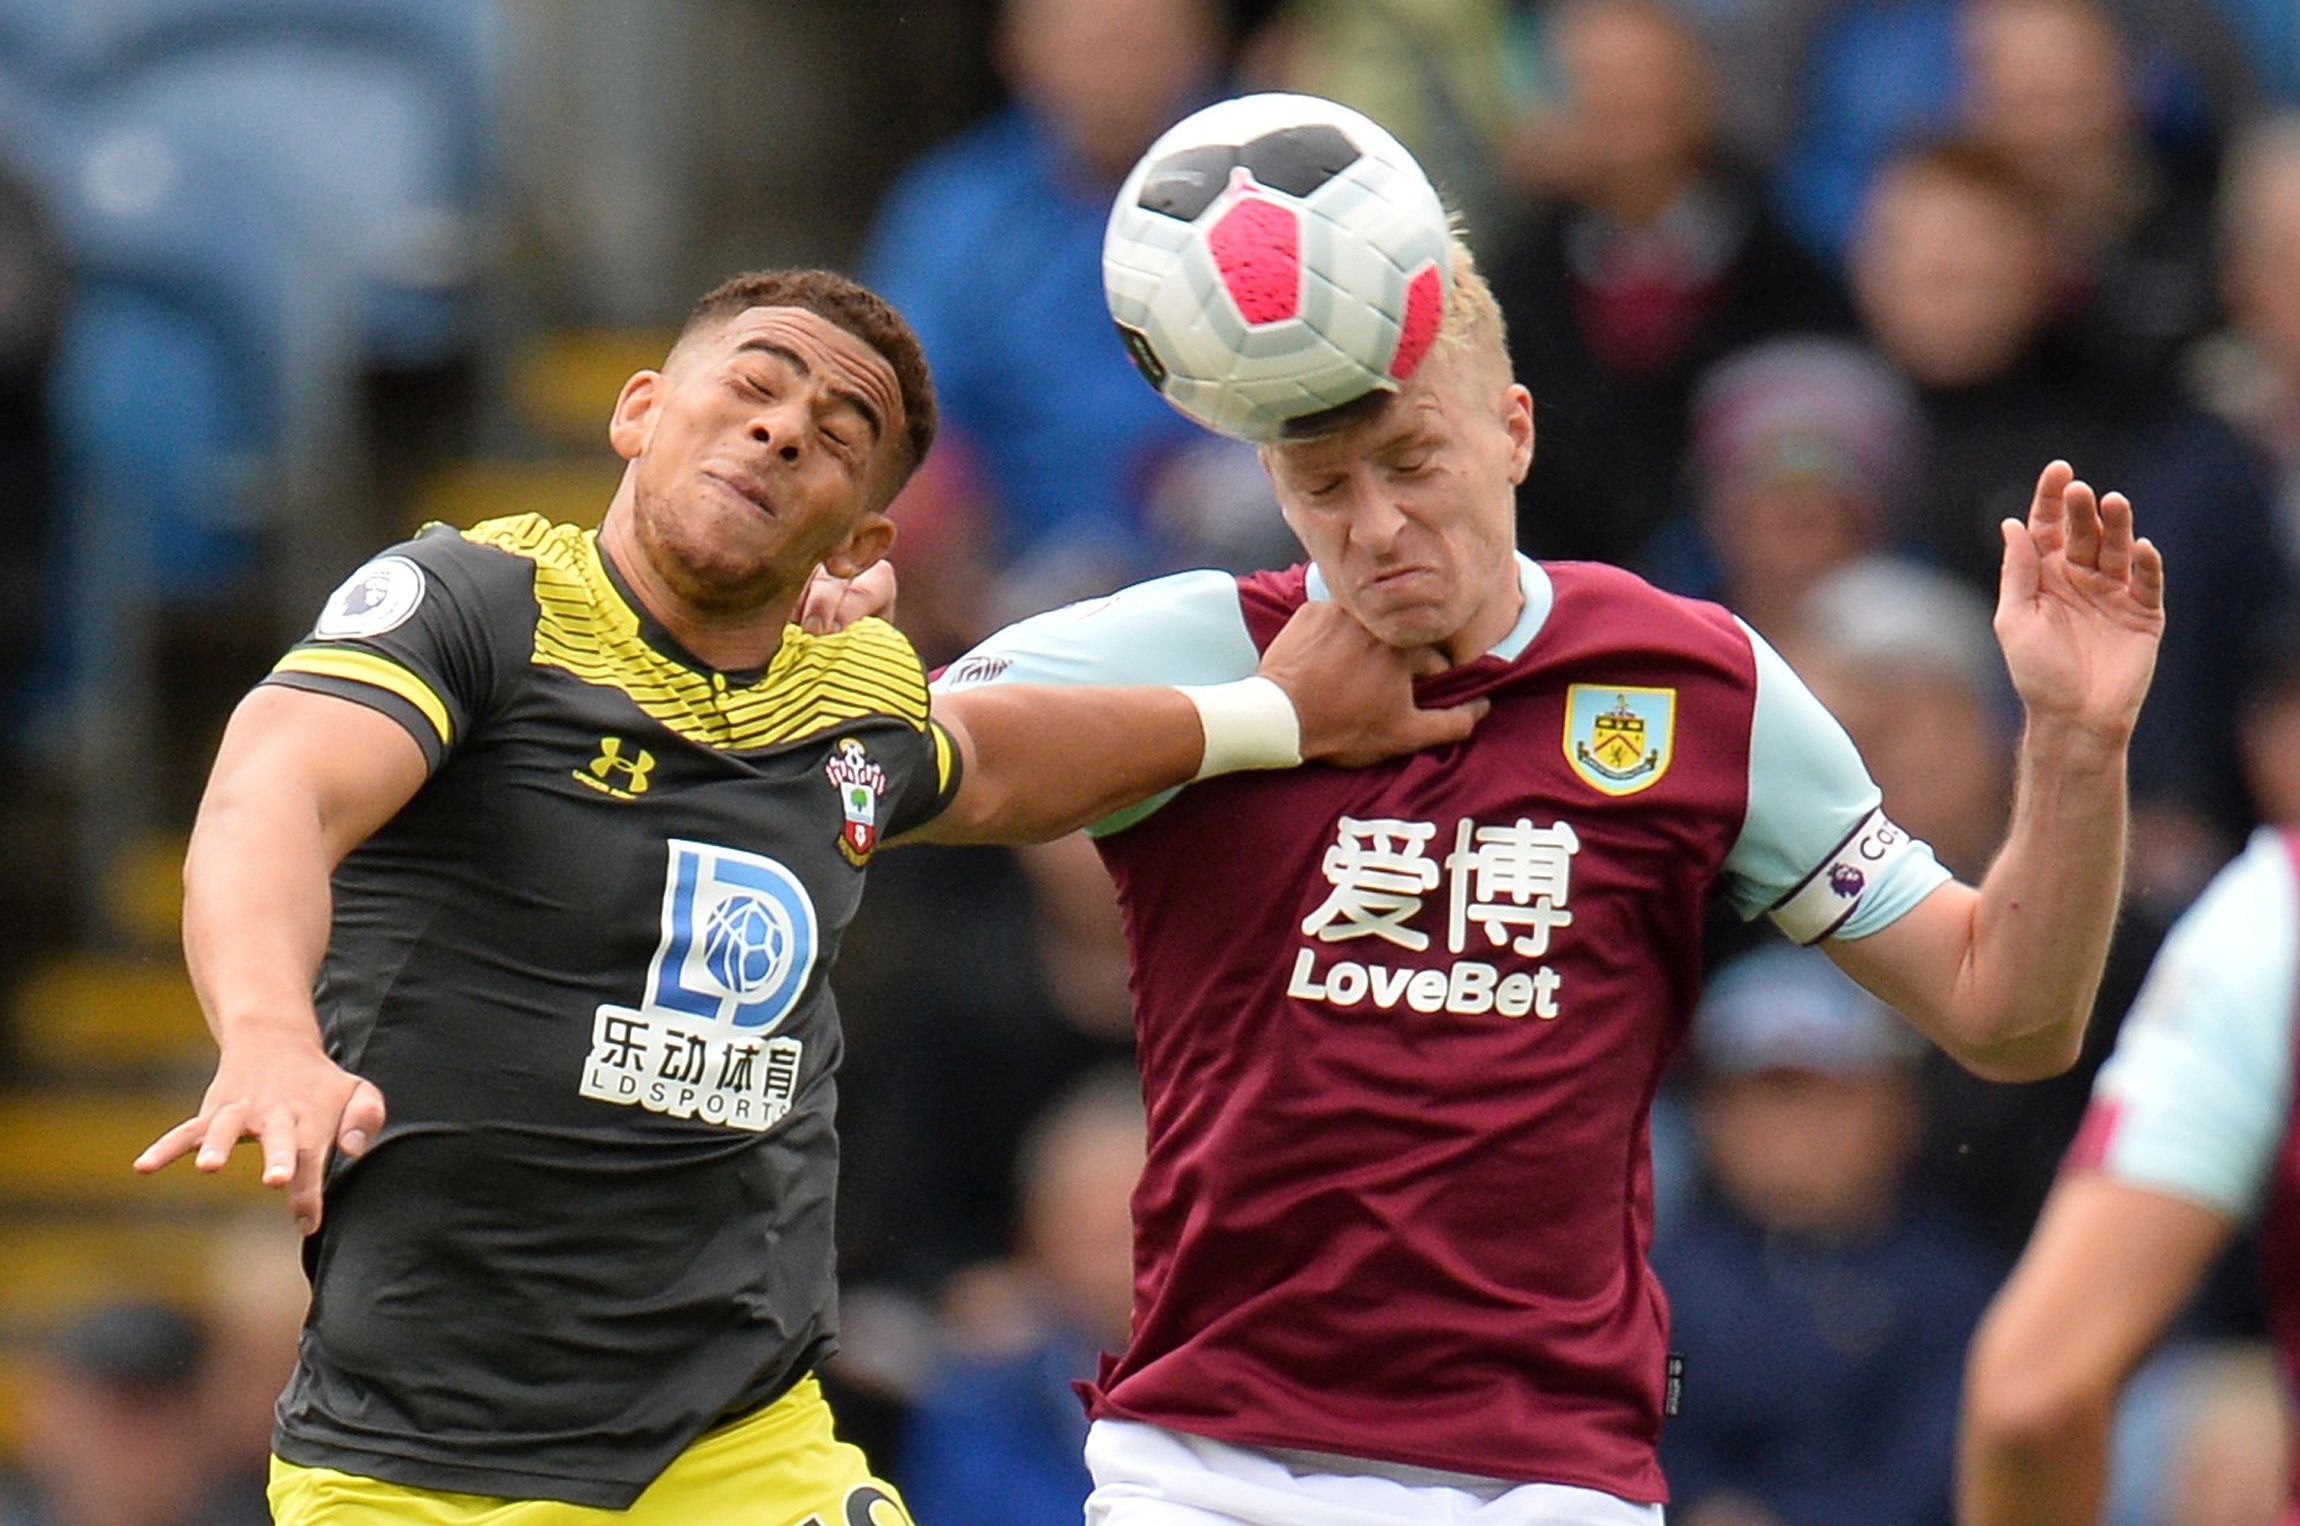 Soccer Football - Premier League - Burnley v Southampton - Turf Moor, Burnley, Britain - August 10, 2019  Southampton's Che Adams in action with Burnley's Ben Mee    REUTERS/Peter Powell  EDITORIAL USE ONLY. No use with unauthorized audio, video, data, fixture lists, club/league logos or 